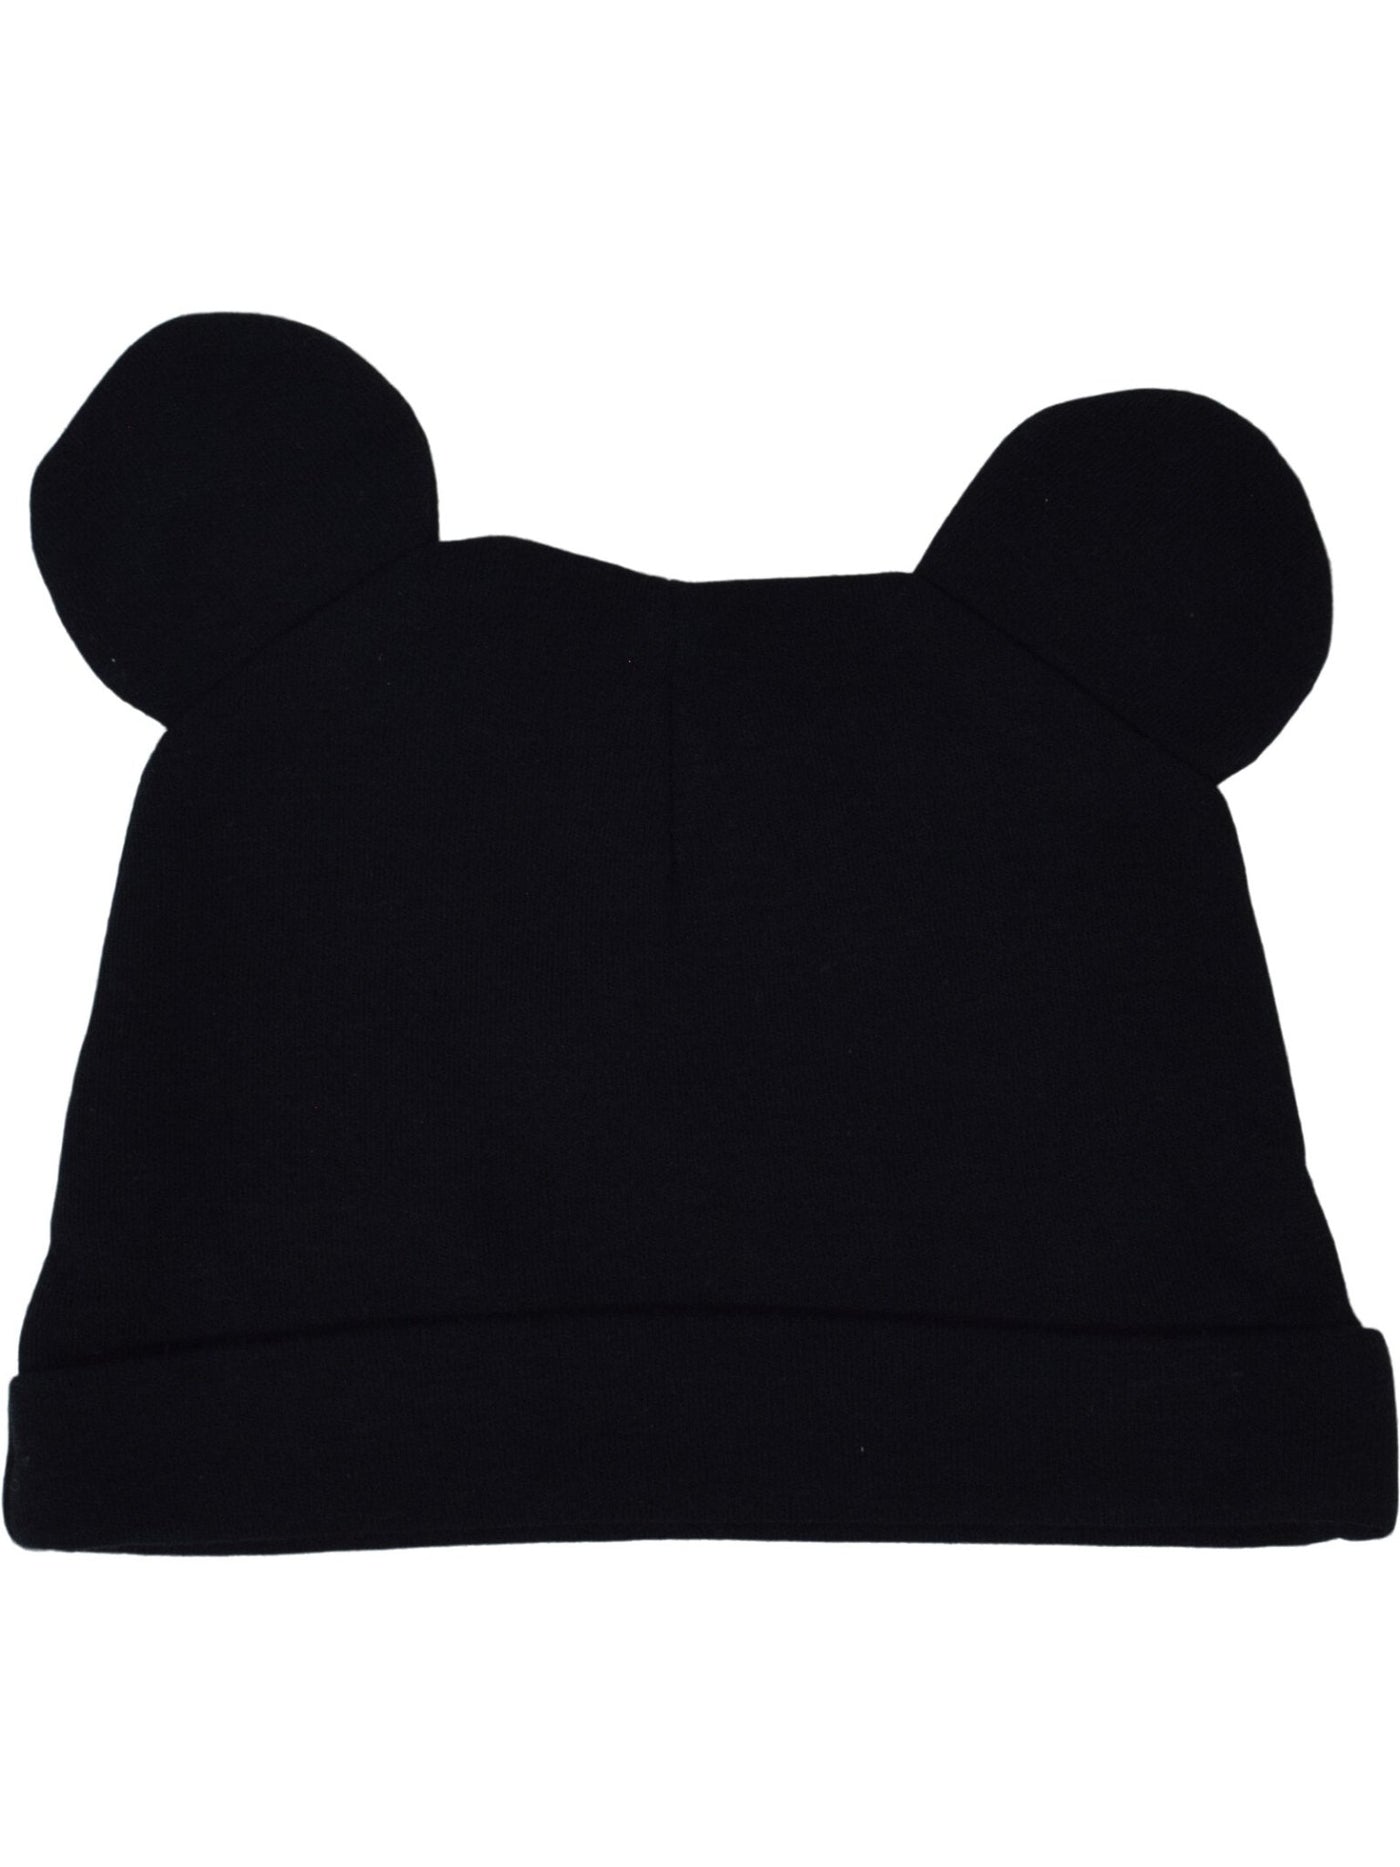 Disney Mickey Mouse Cosplay Bodysuit and Hat Set - imagikids